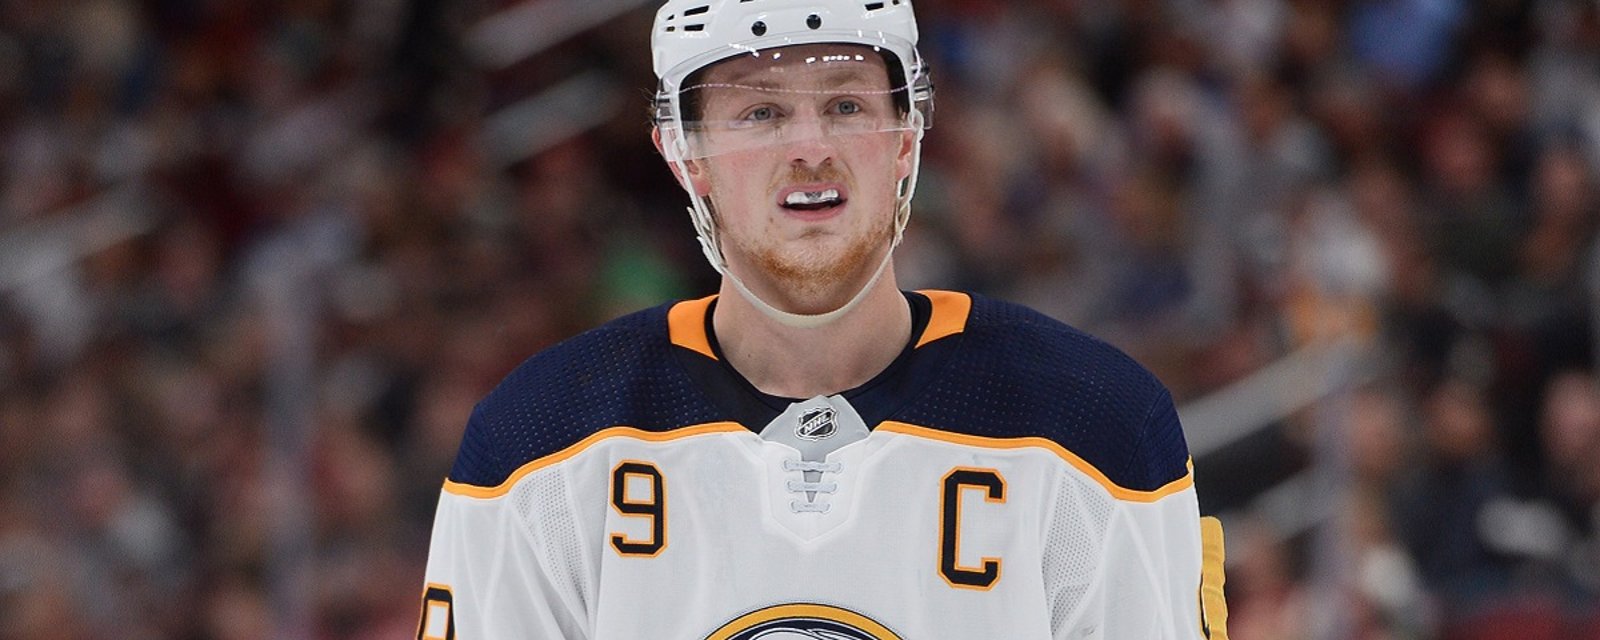 Eichel situation may turn ugly as training camp draws near.